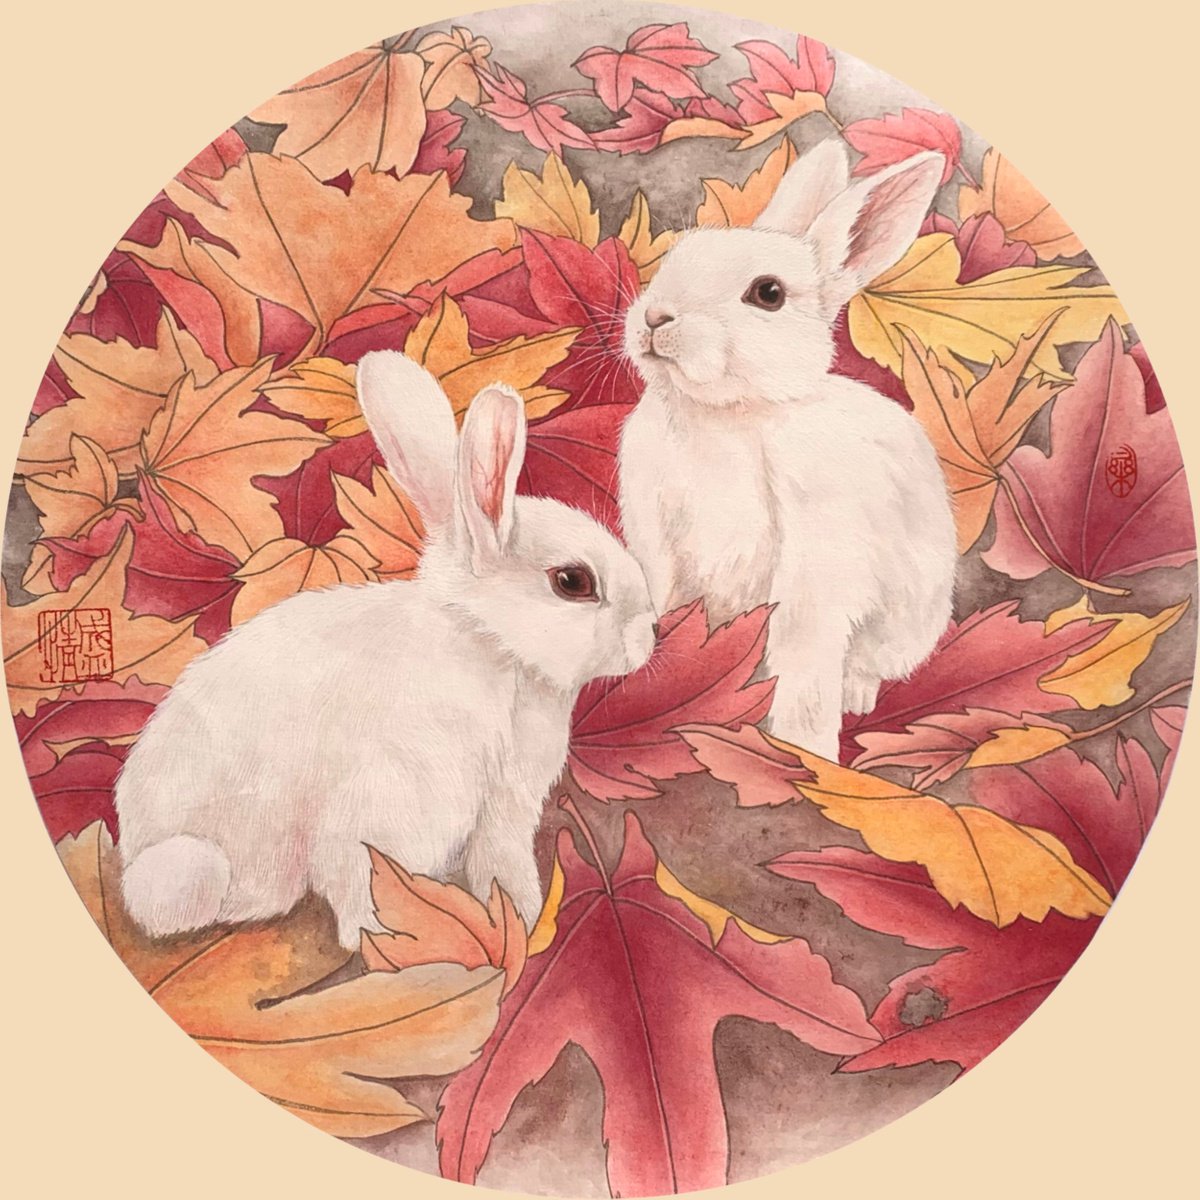 Bunny in the red Leaf, Original Brush Painting by Fiona Sheng